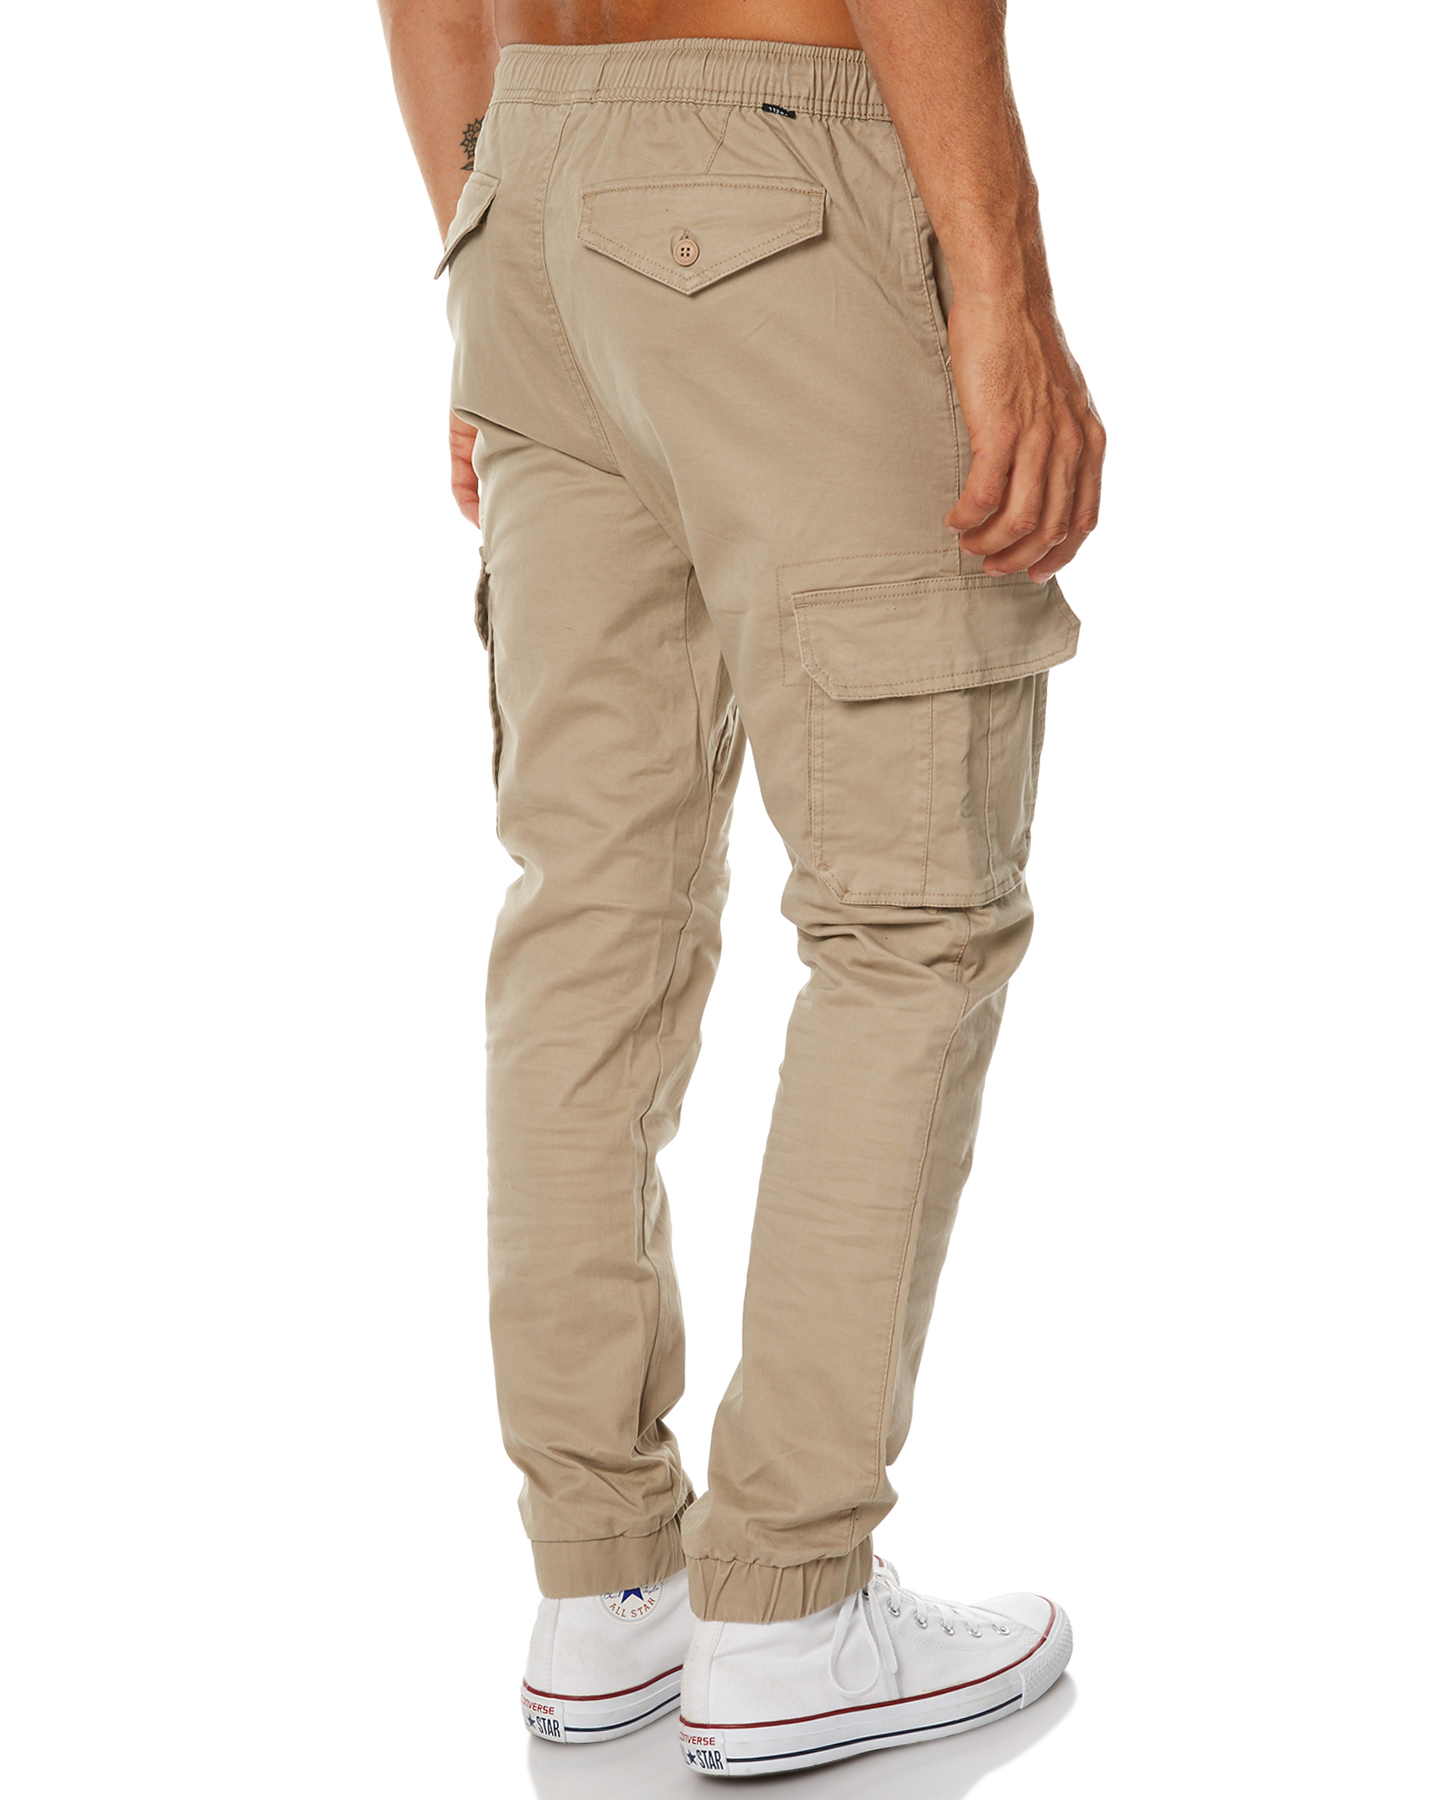 Swell Blunt Mens Cargo Jogger Pant - Khaki | SurfStitch